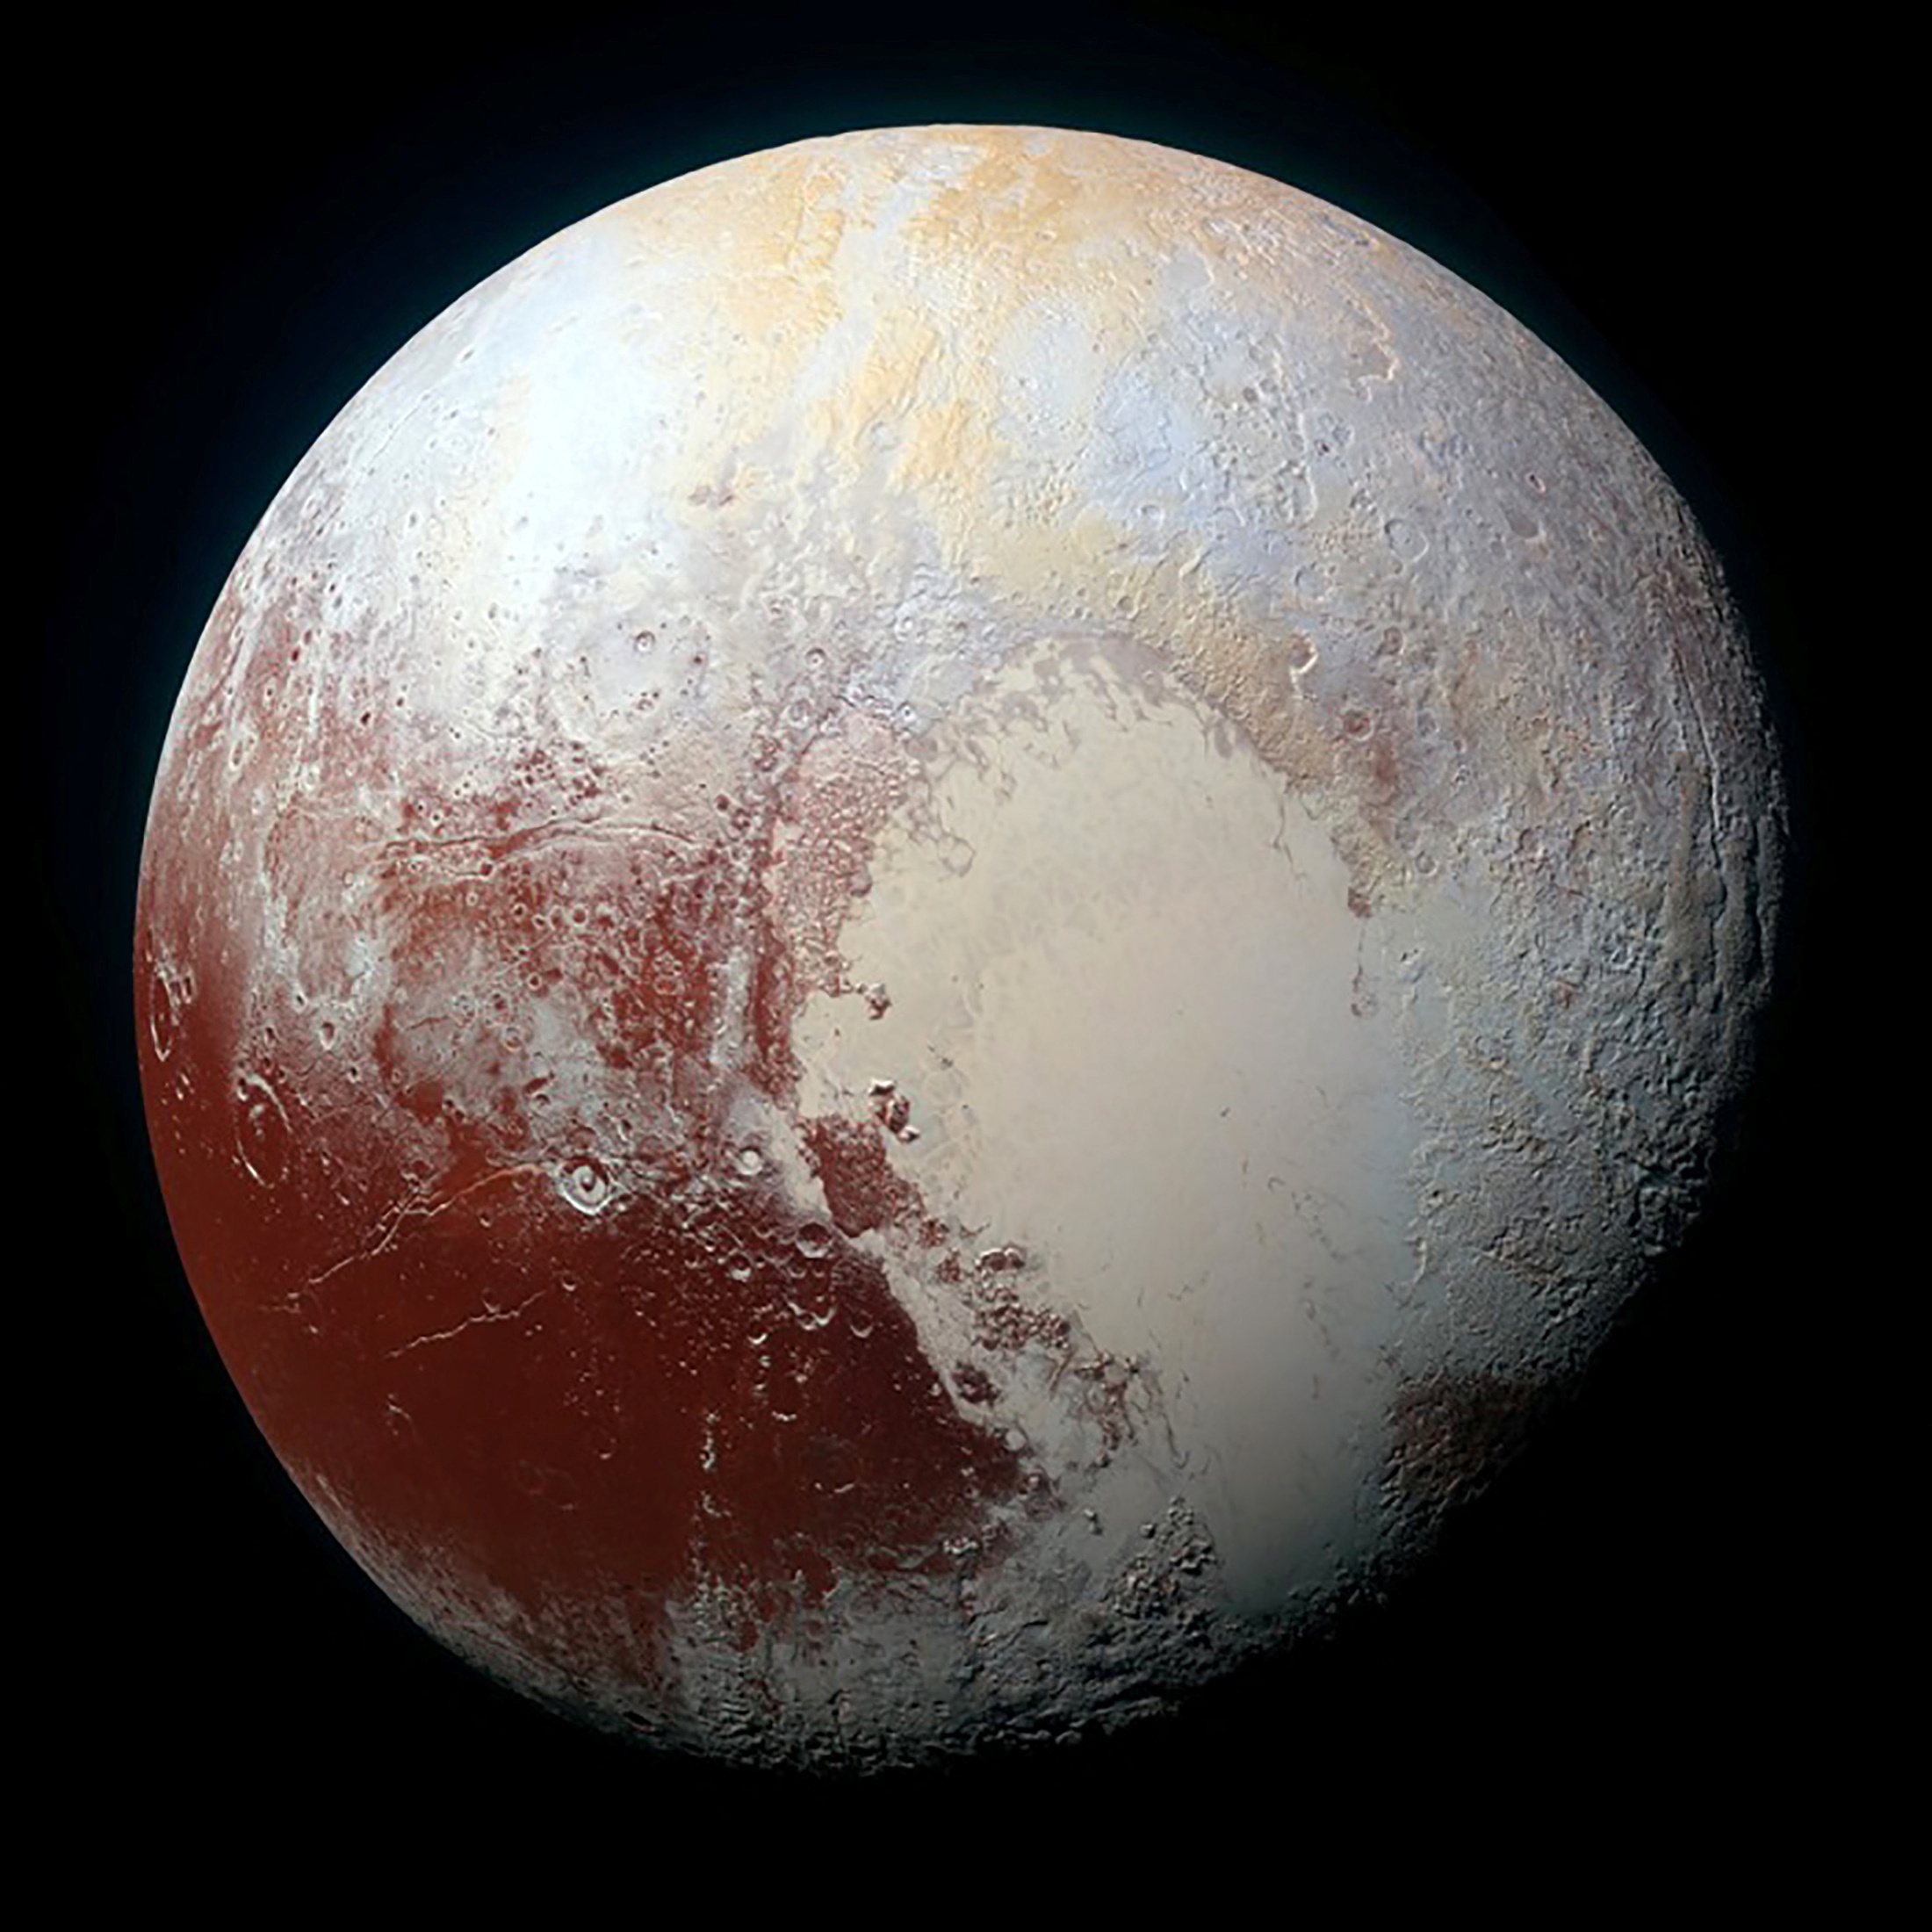 Sputnik Planum on the dwarf planet Pluto is seen in an undated image from NASA's New Horizons spacecraft